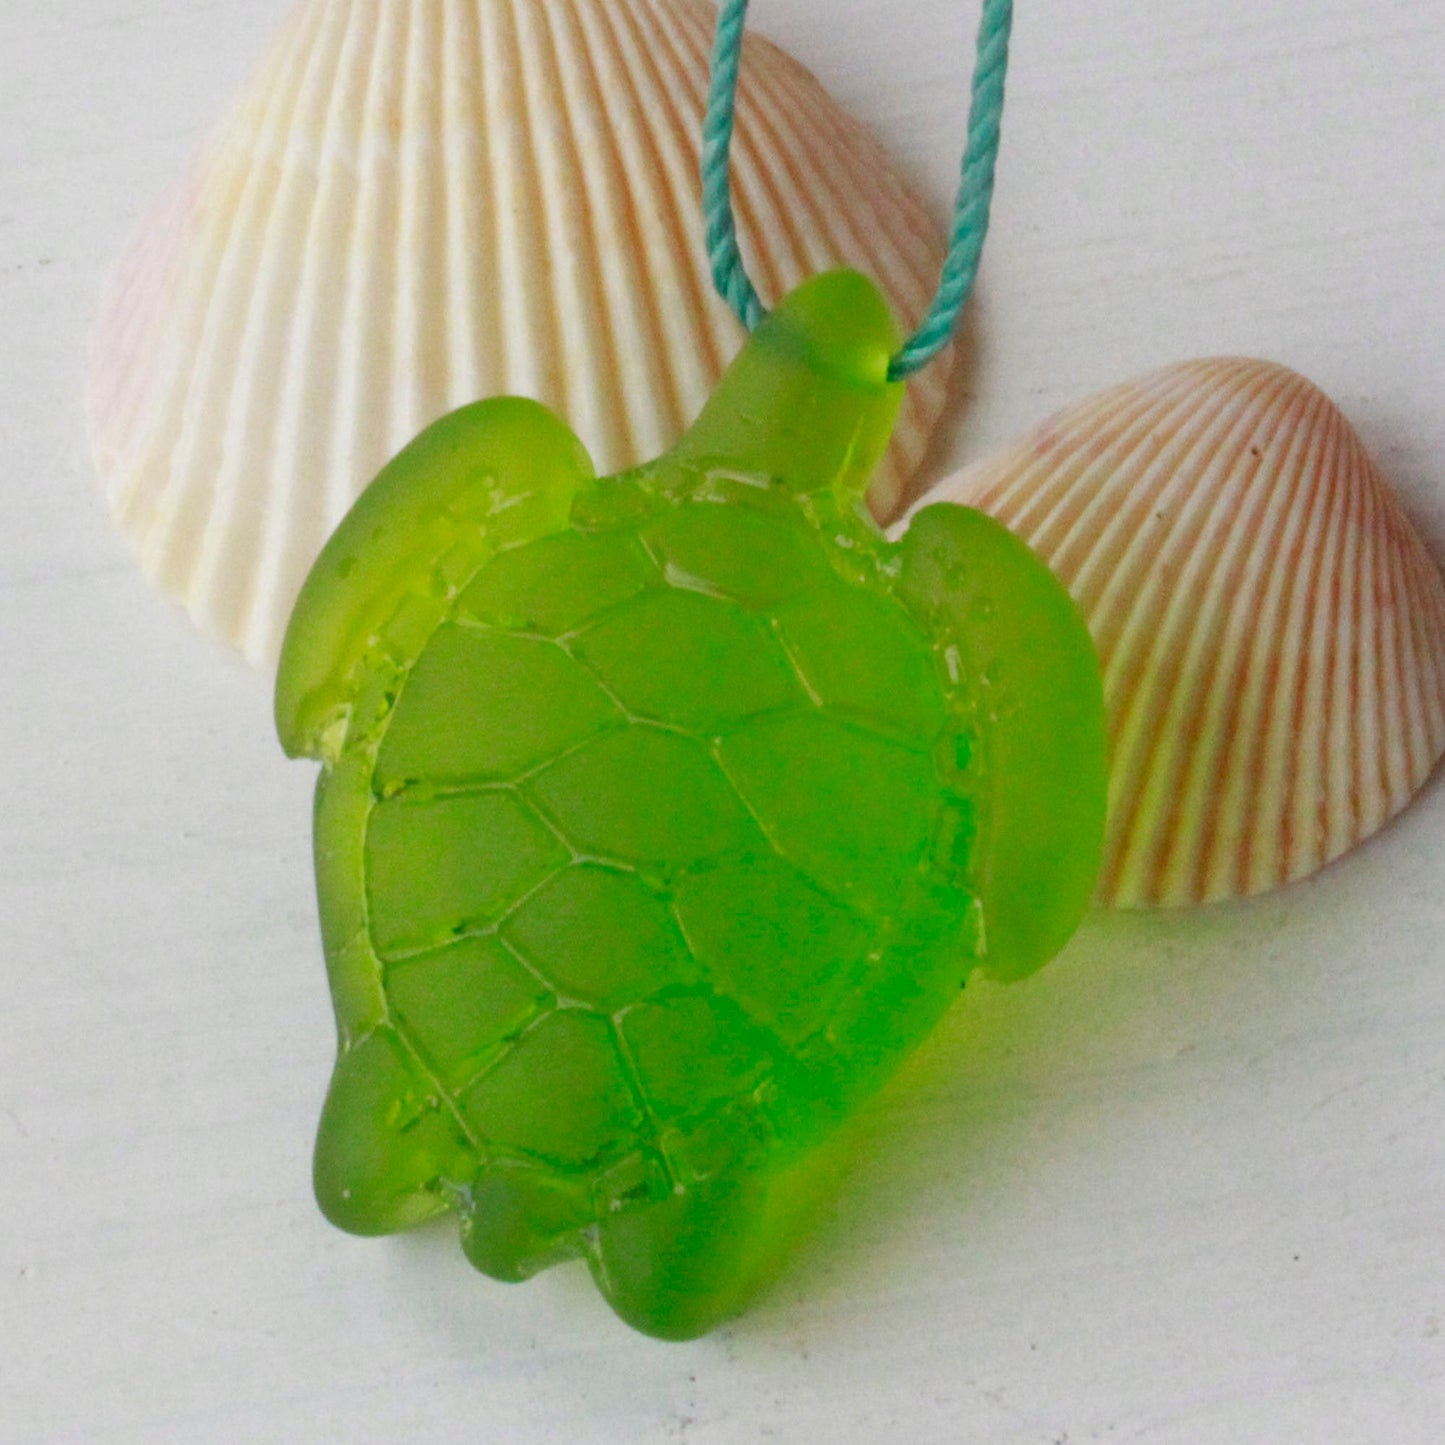 27x35mm Frosted Glass Turtle Pendant - Lime - 2 Beads